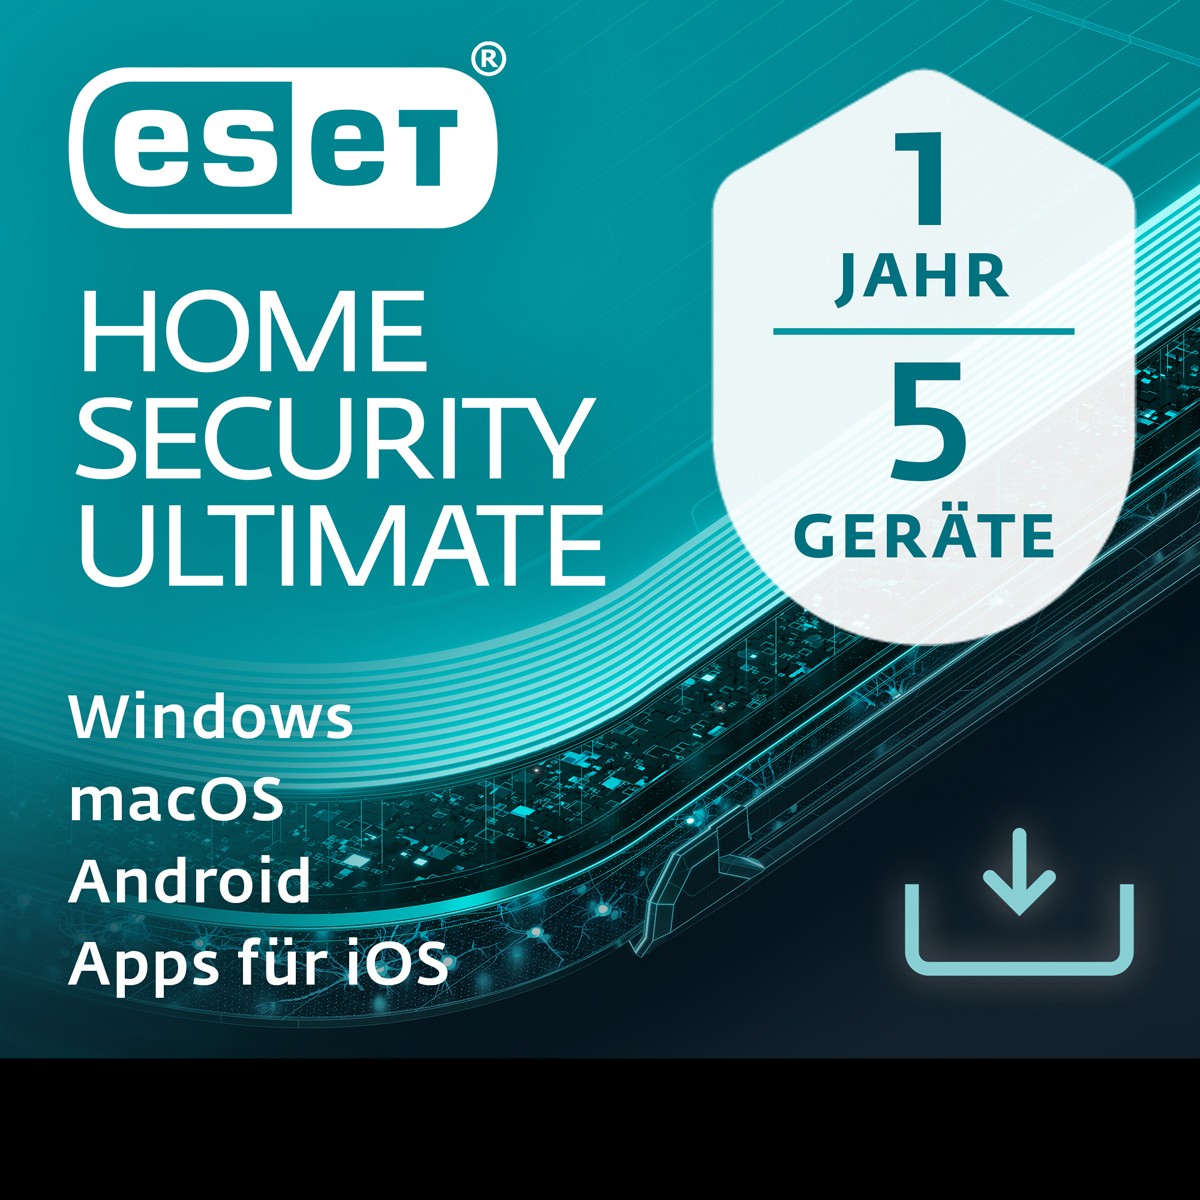 ESET Home Security Ultimate - 5 User. 1 Year - ESD-DownloadESD - EHSU-N1A5-VAKT-E